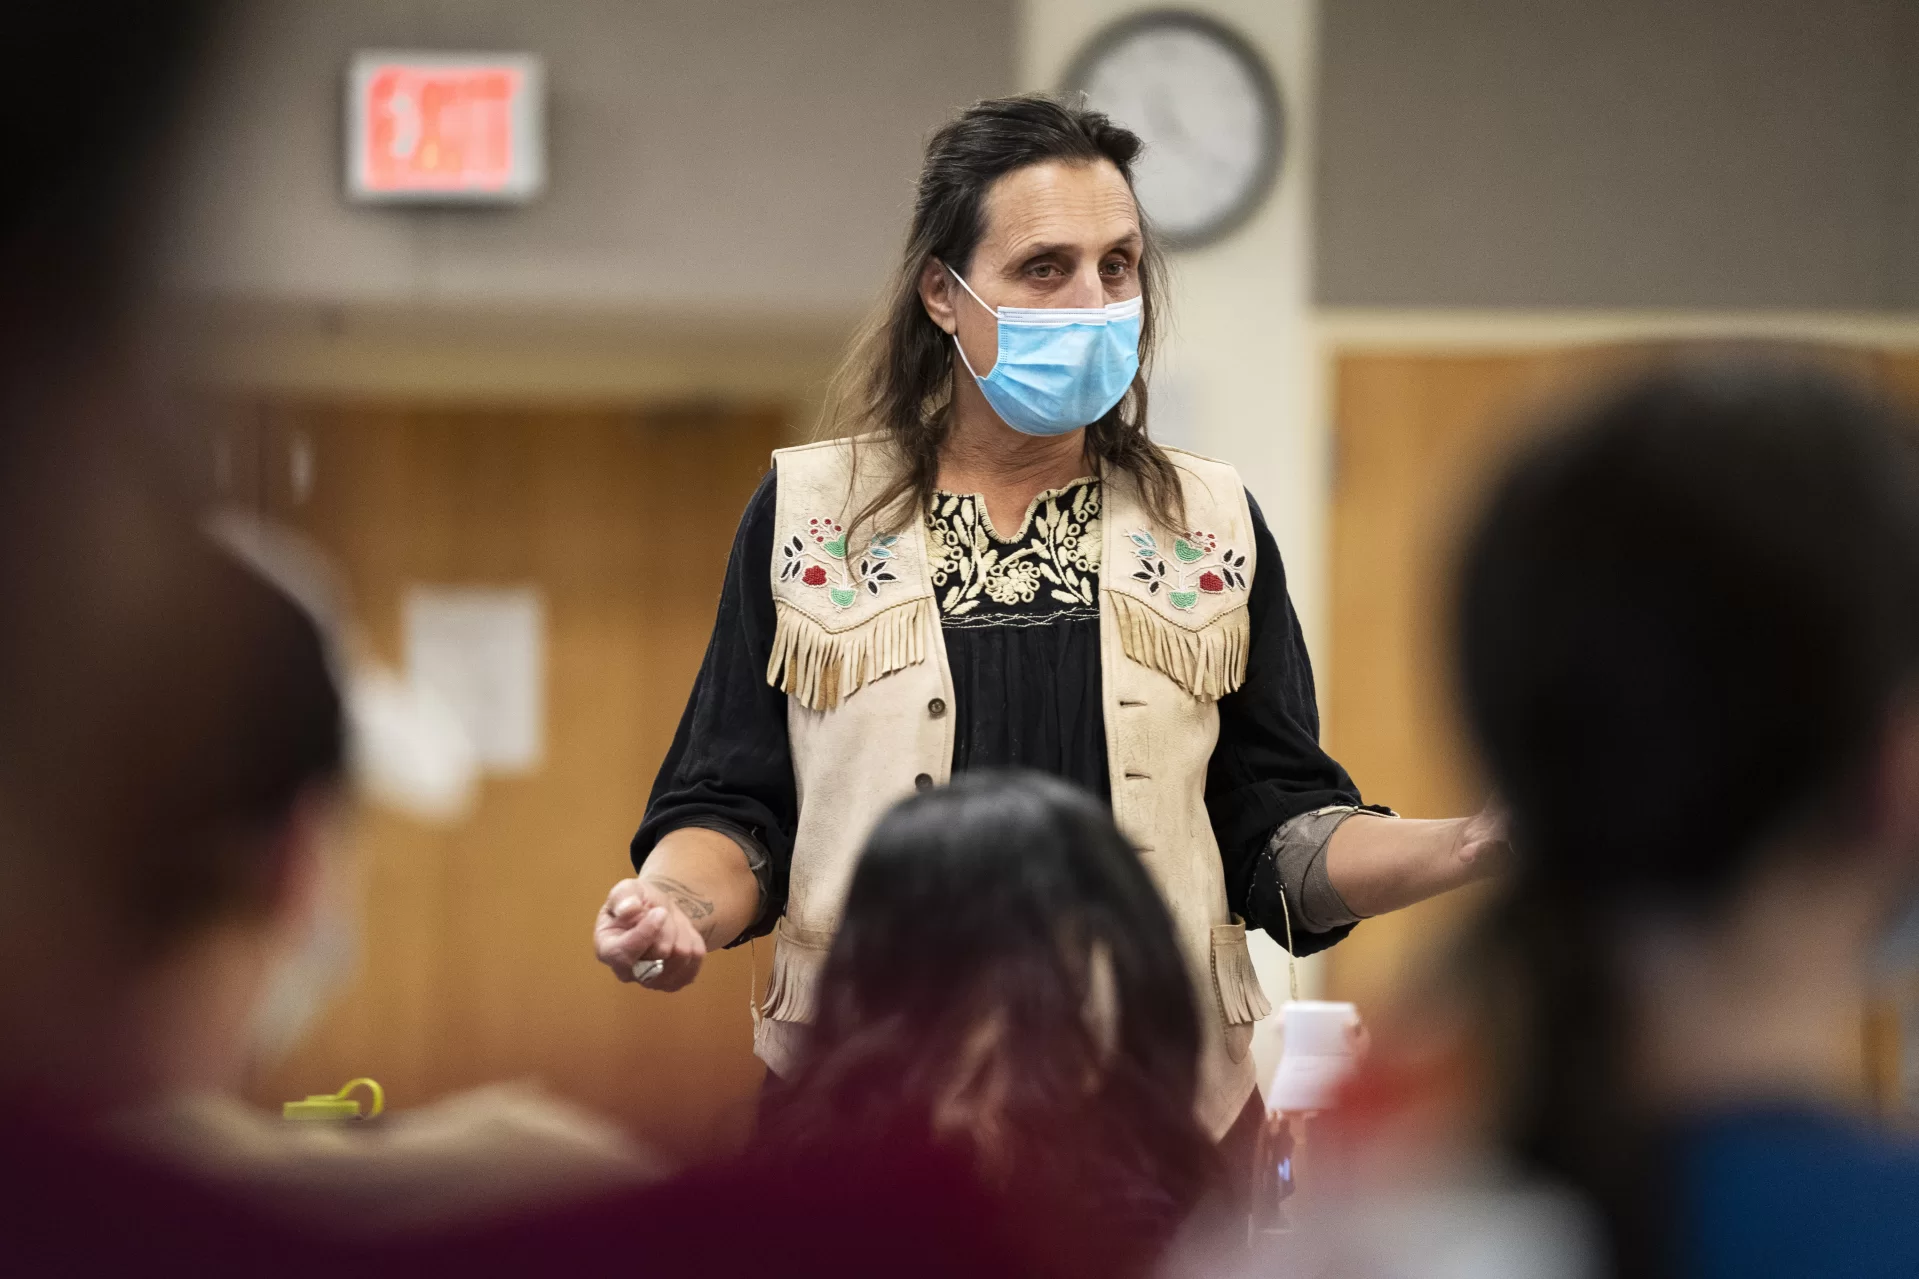 Students listen to speaker Winona LaDuke in Keck Classroom on October 26, 2021. (Theophil Syslo | Bates College)